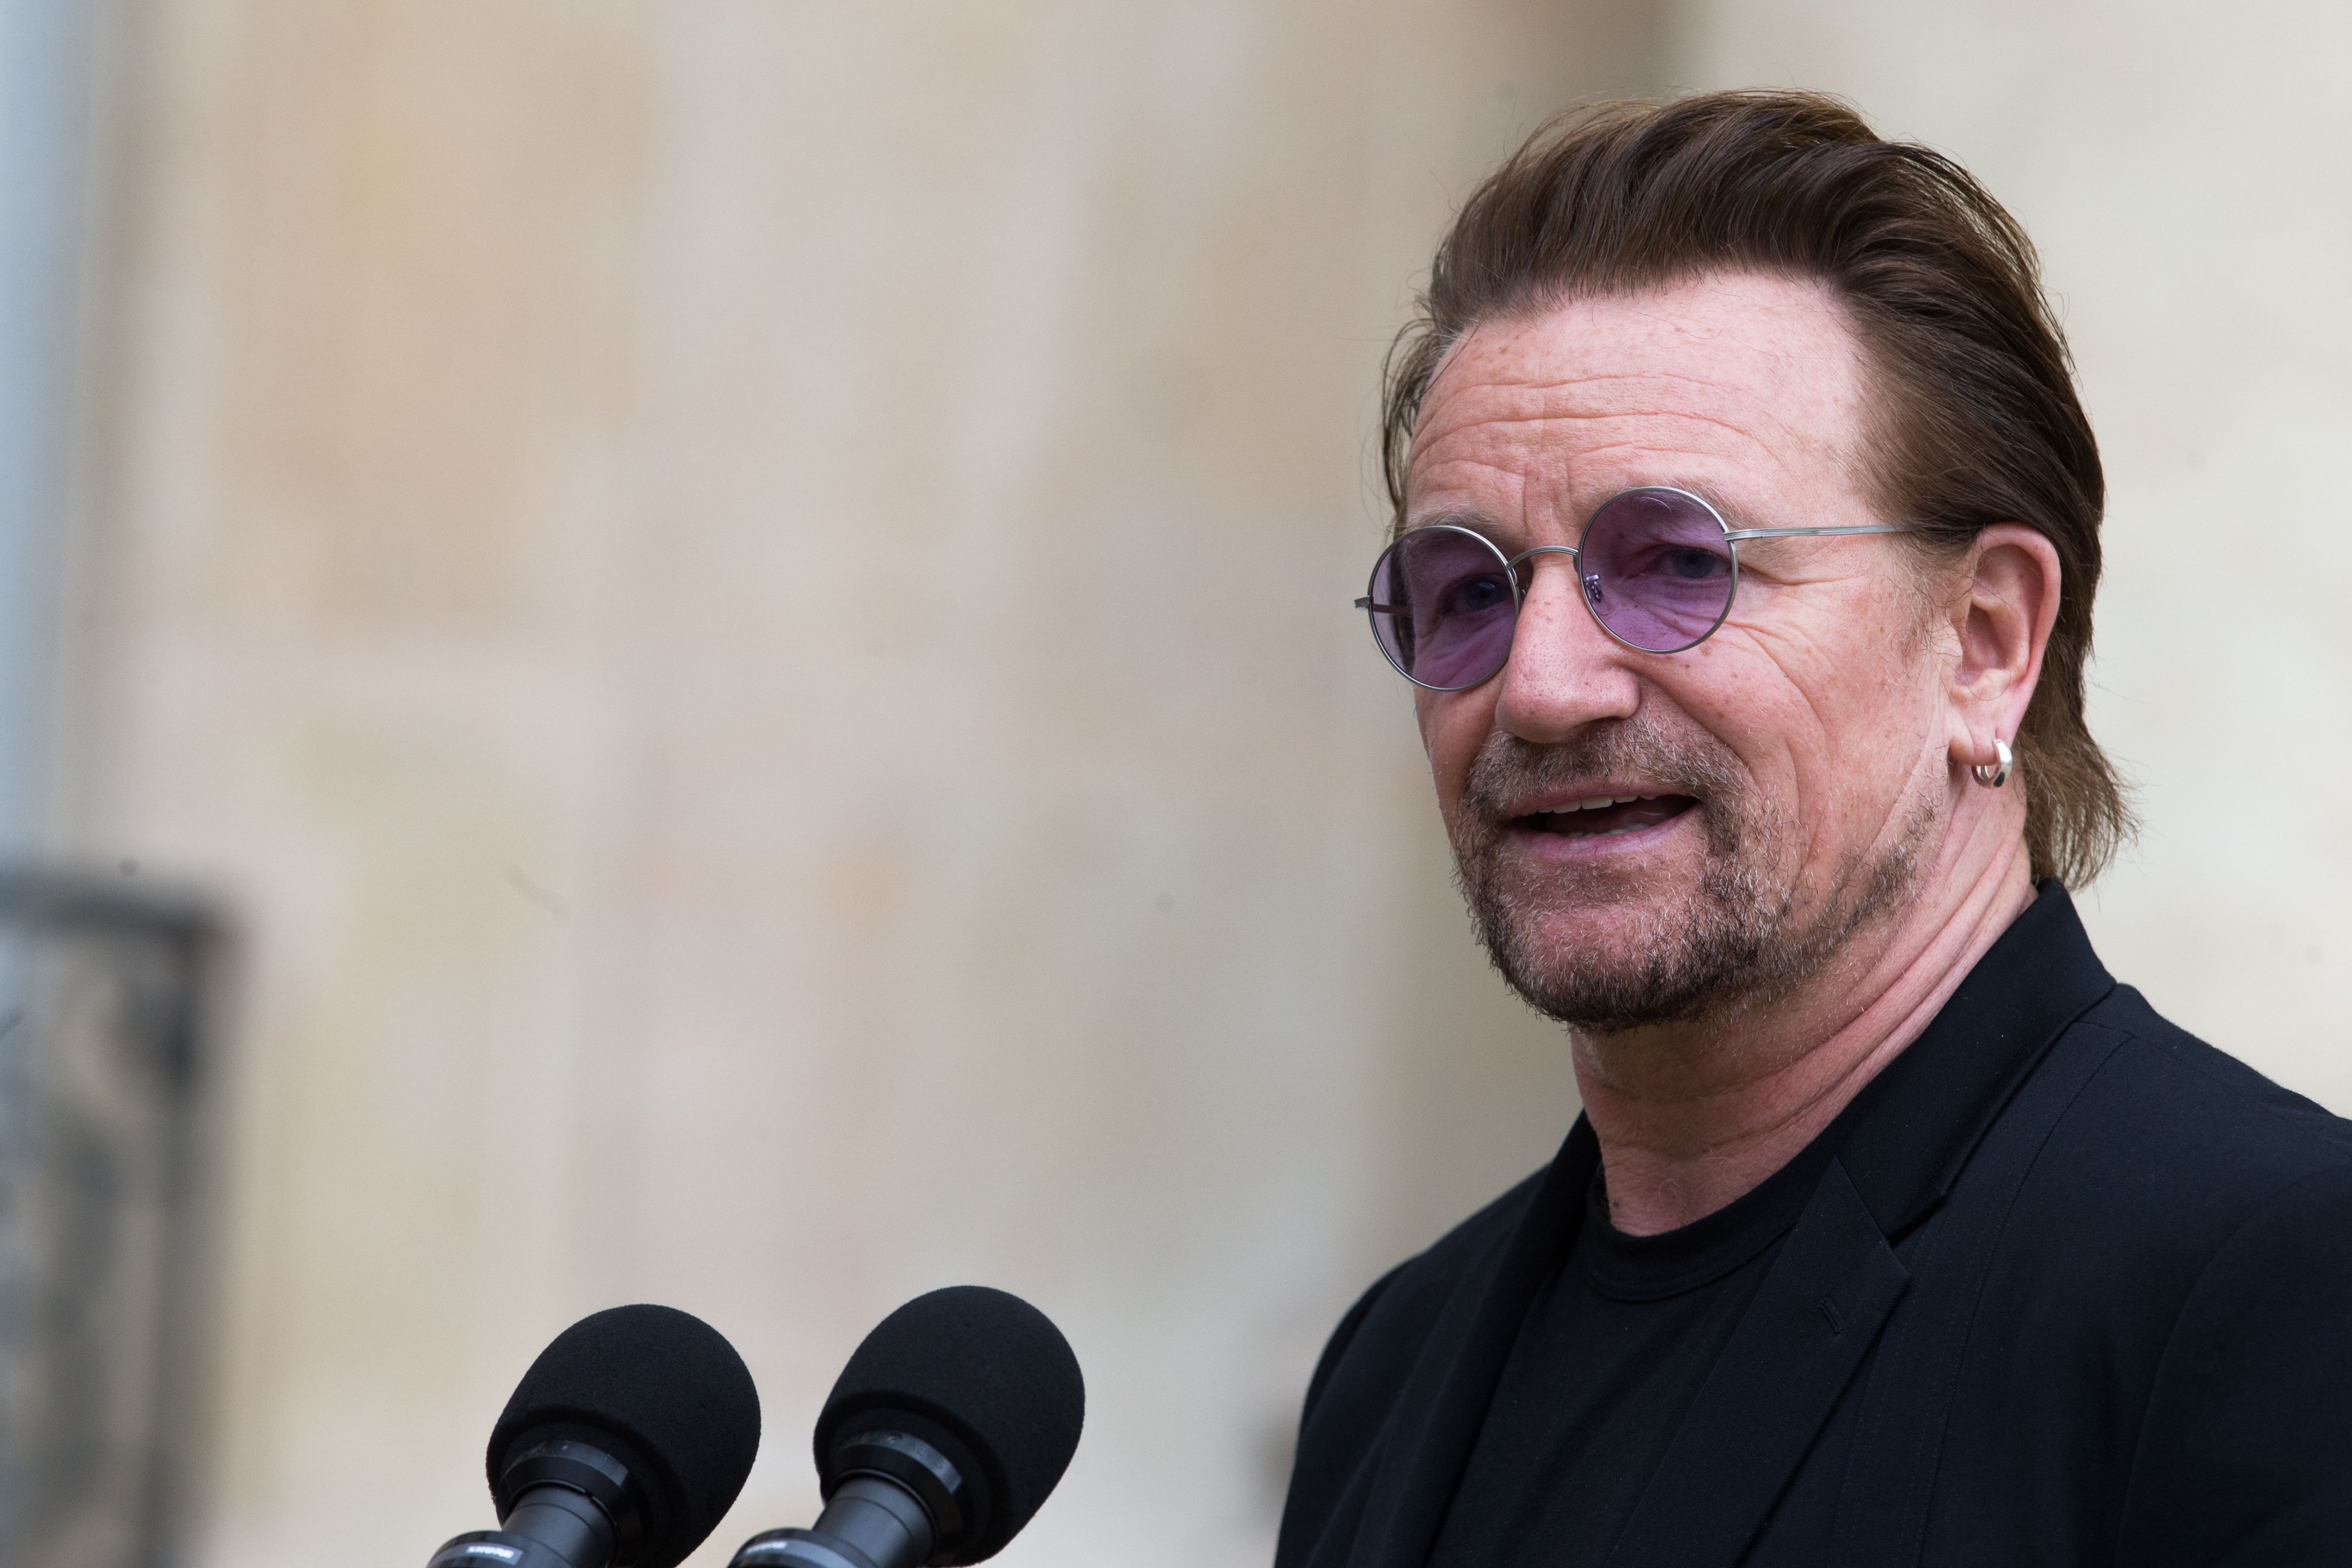 Bono, singer of U2 and cofounder of the NGO One, delivers a speech after his meeting with French President Emmanuel Macron (not pictured) during a press conference at the Elysee Palace on July 24, 2017 in Paris, France. (Nicolas Kovarik/IP3—Getty Images)